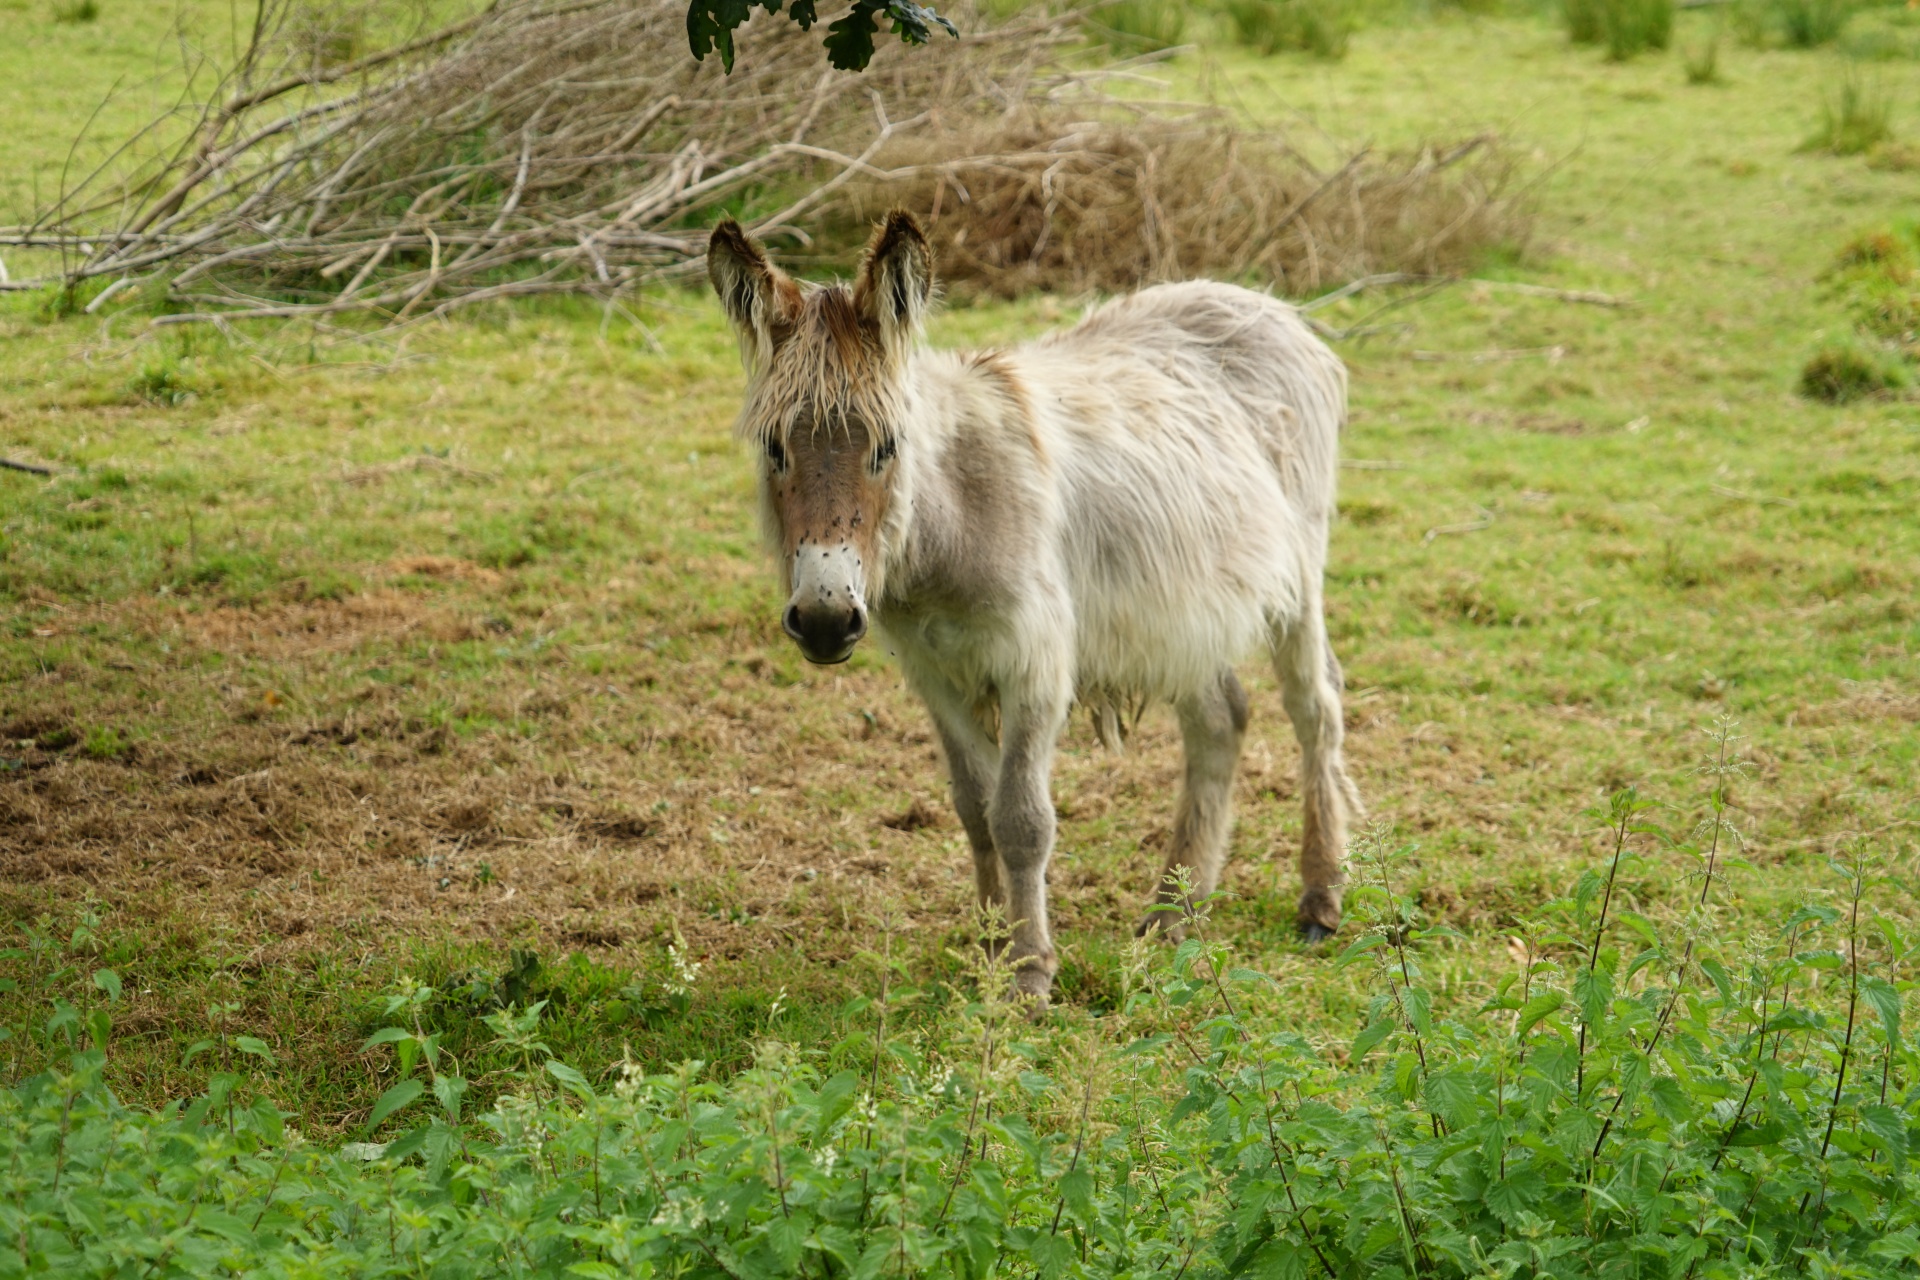 Look Of The Little Donkey